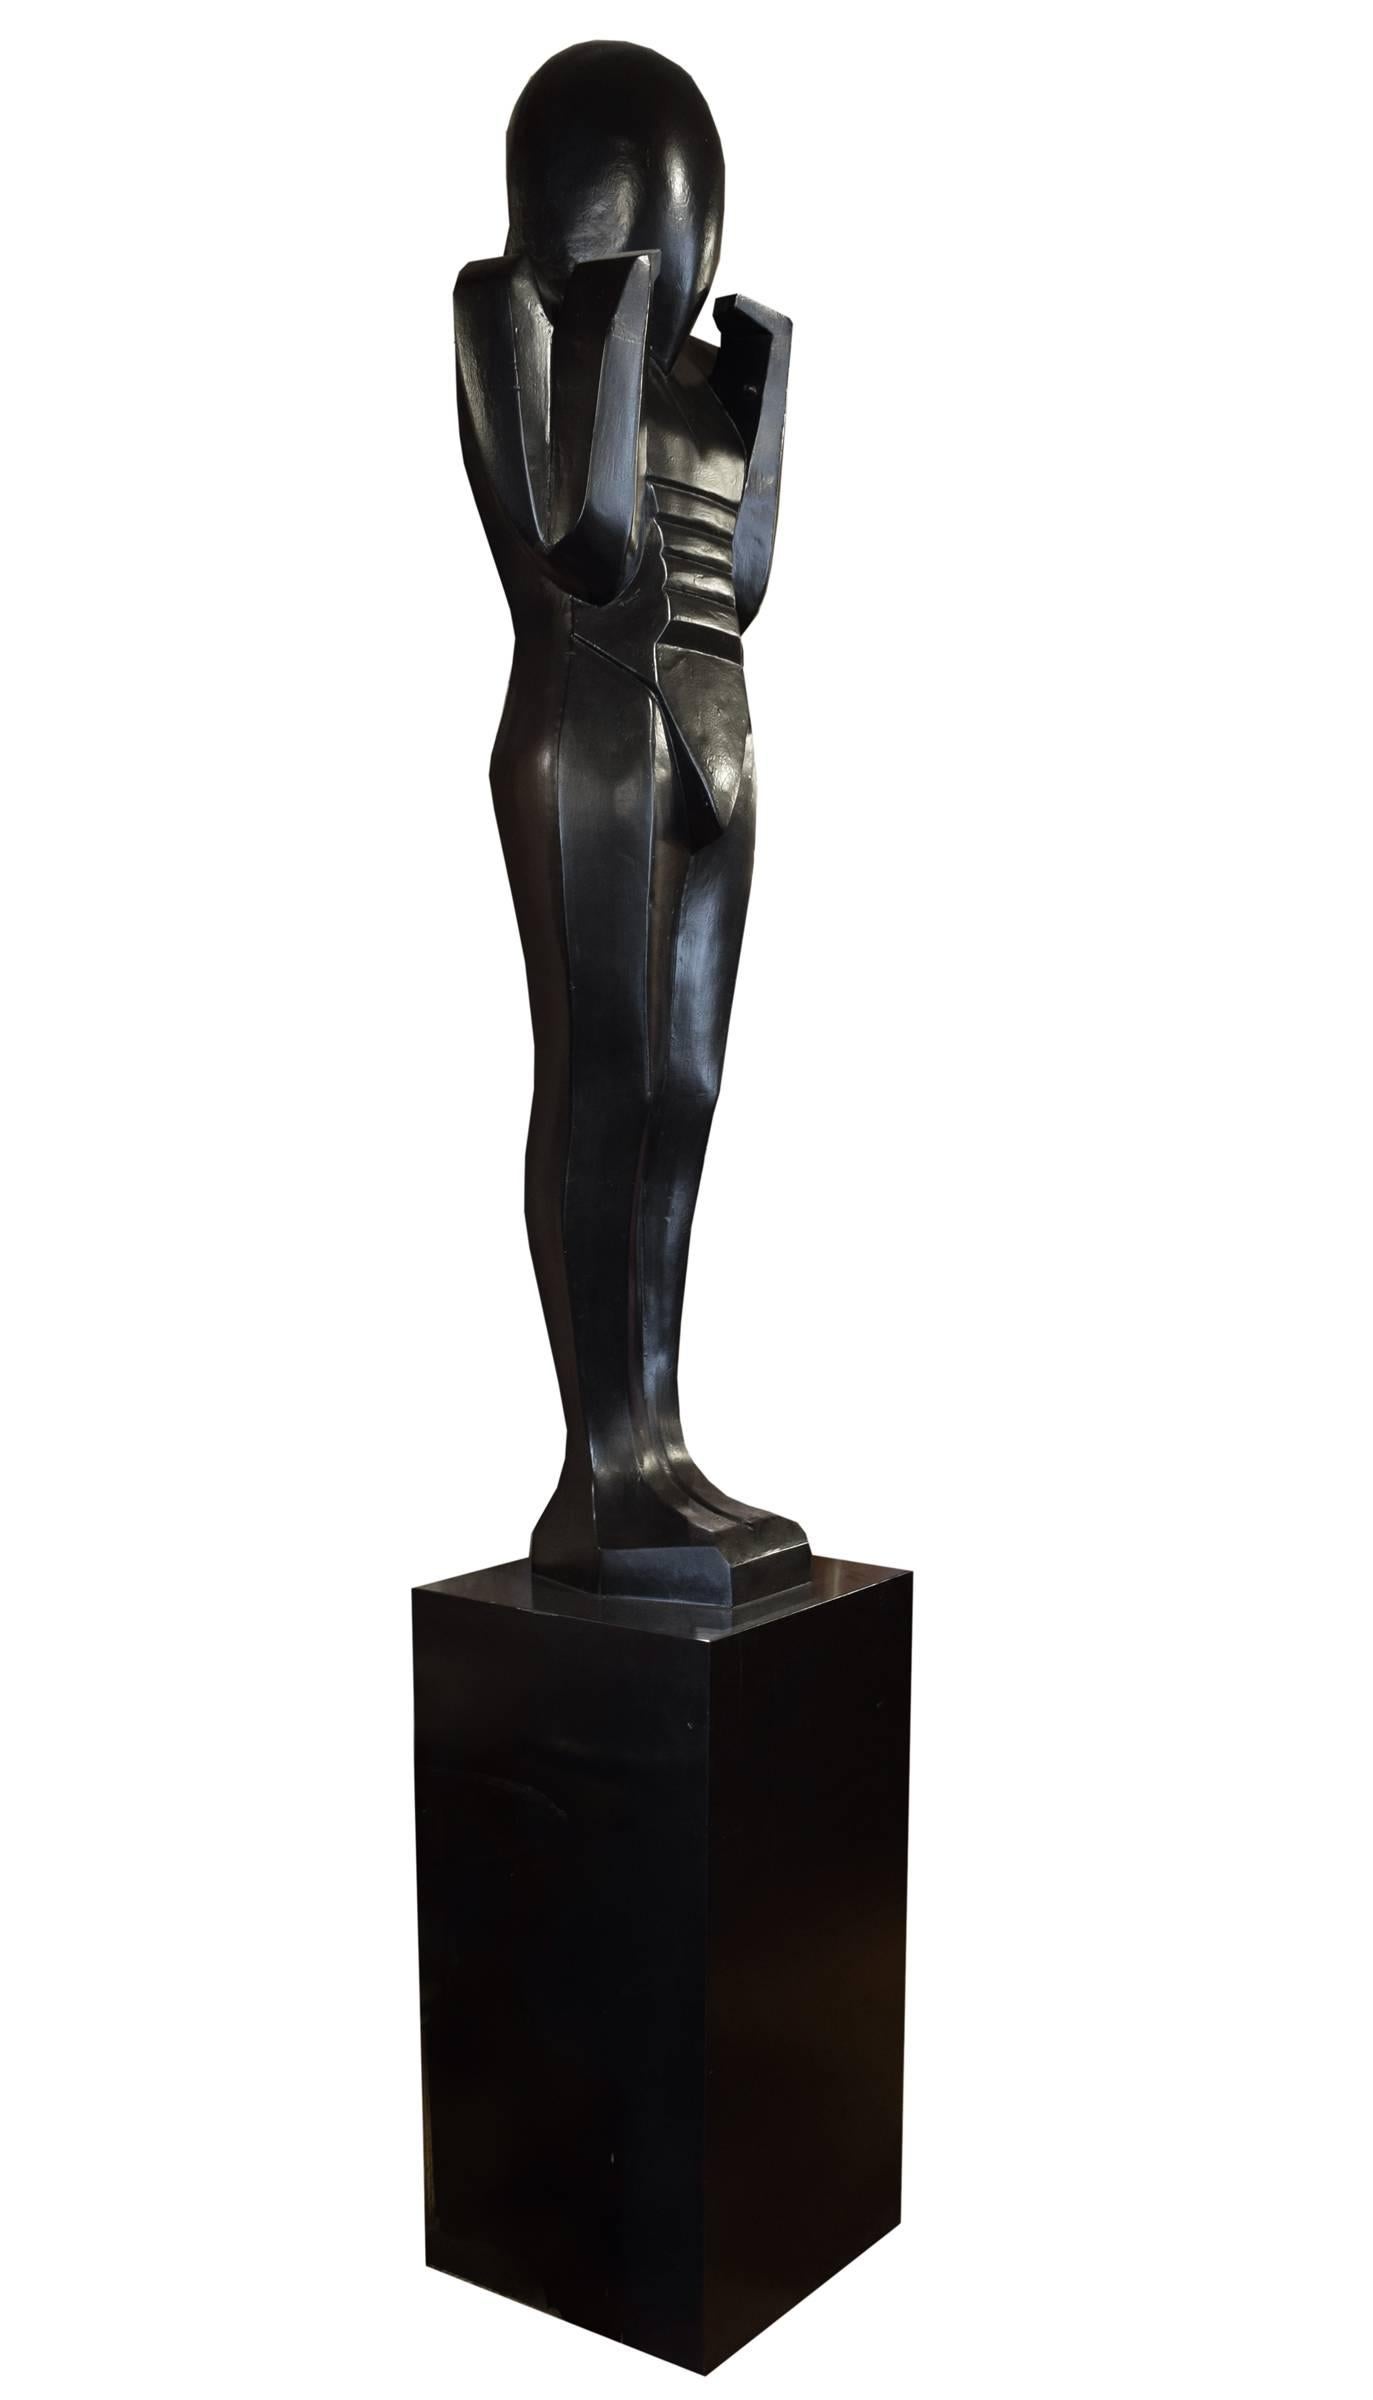 Composition statue in the Art Deco style, from a French theatre, circa 1940.